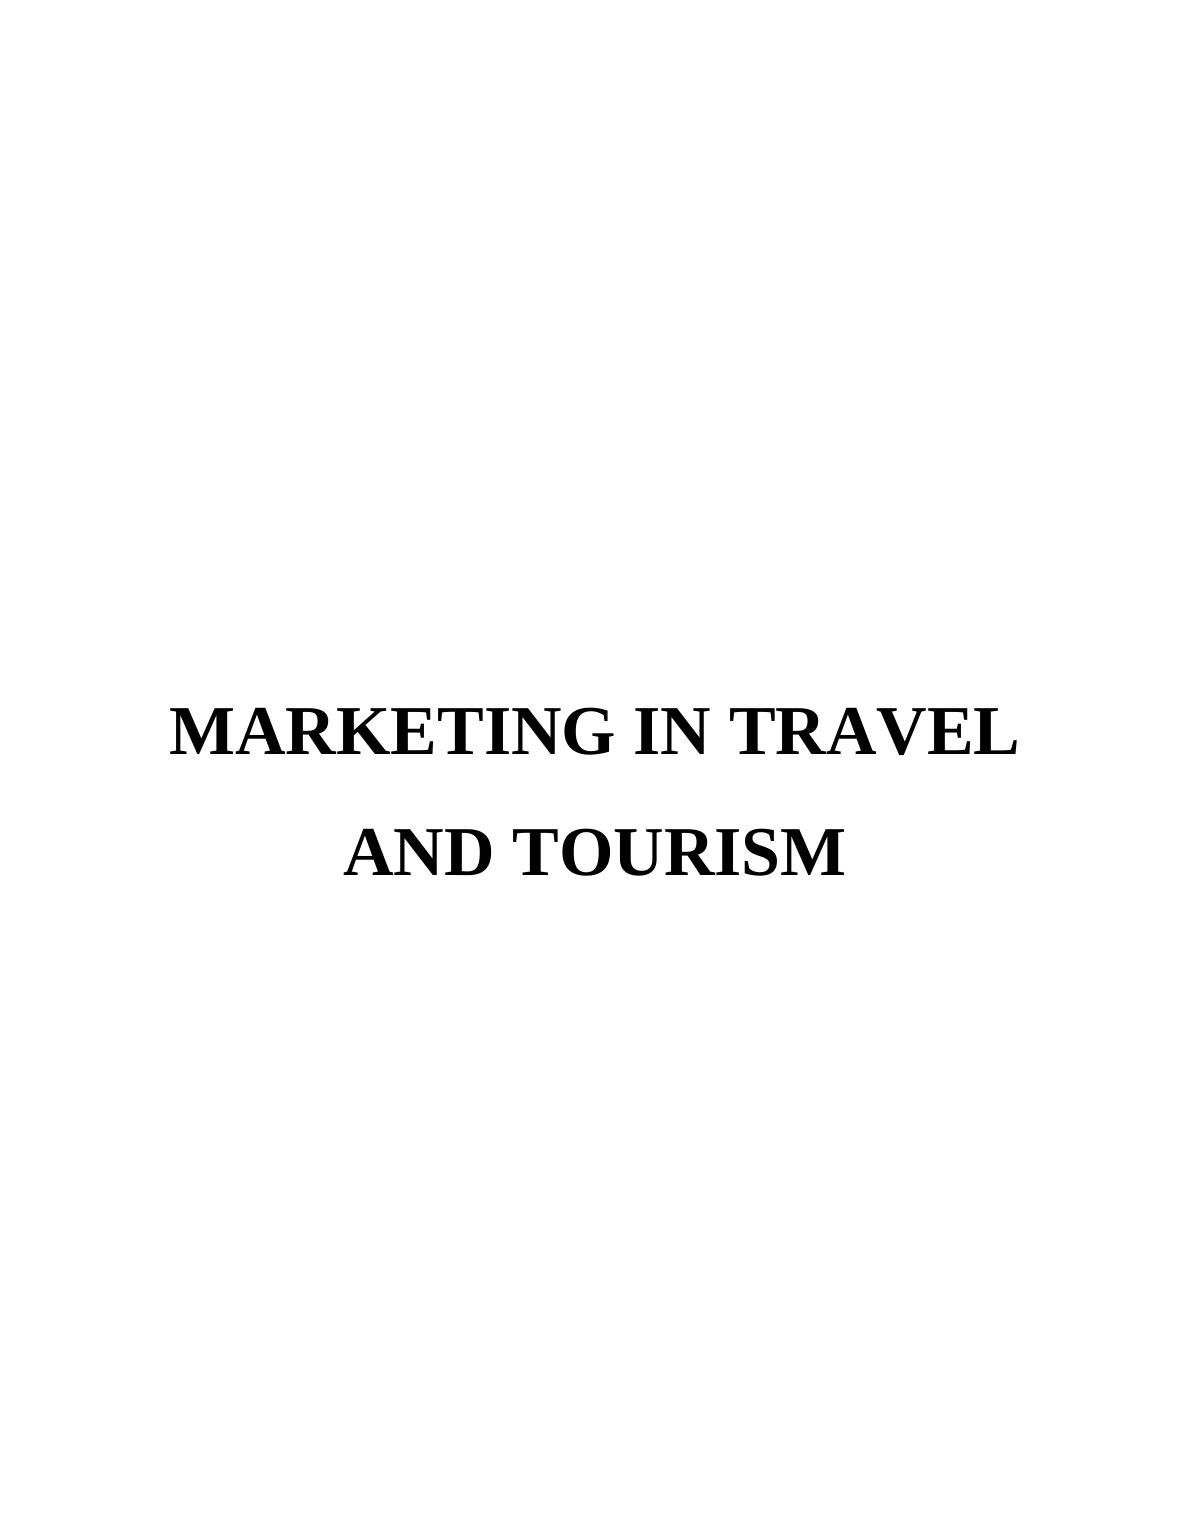 Marketing in Travel and Tourism: Report_1